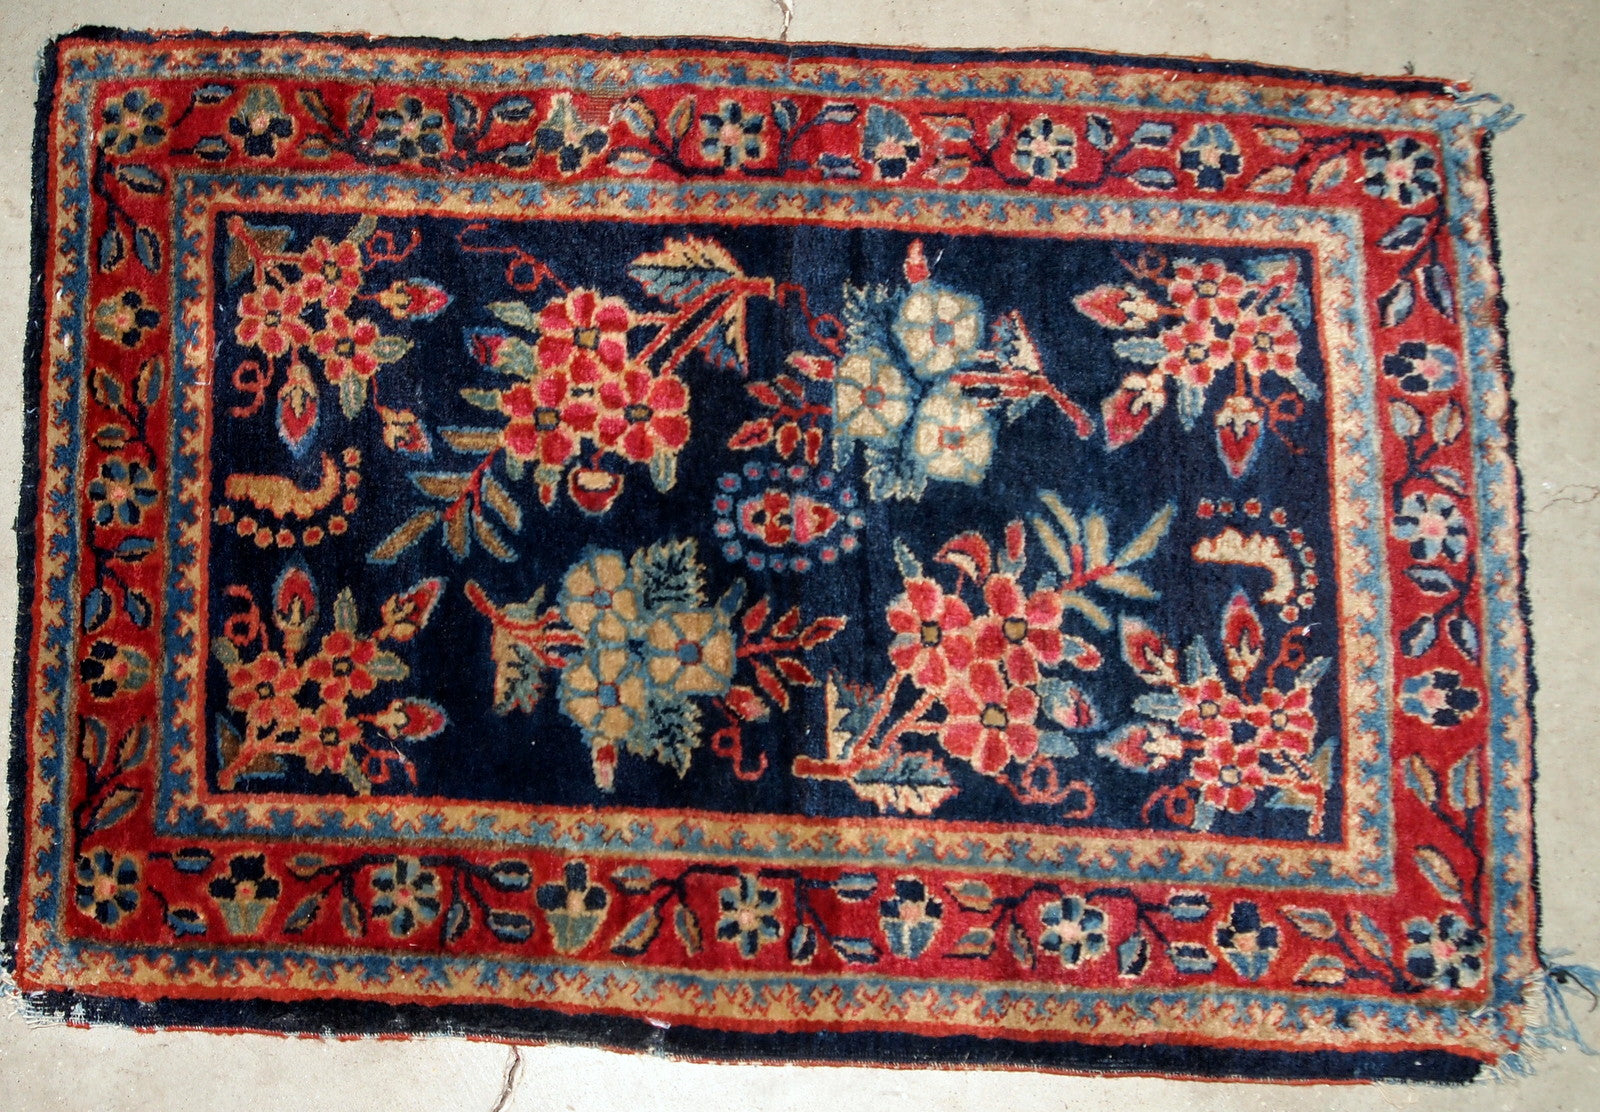 Handmade antique Persian Hamadan rug in original condition, the corners has some age signs. The rug is from the beginning of 20th century.